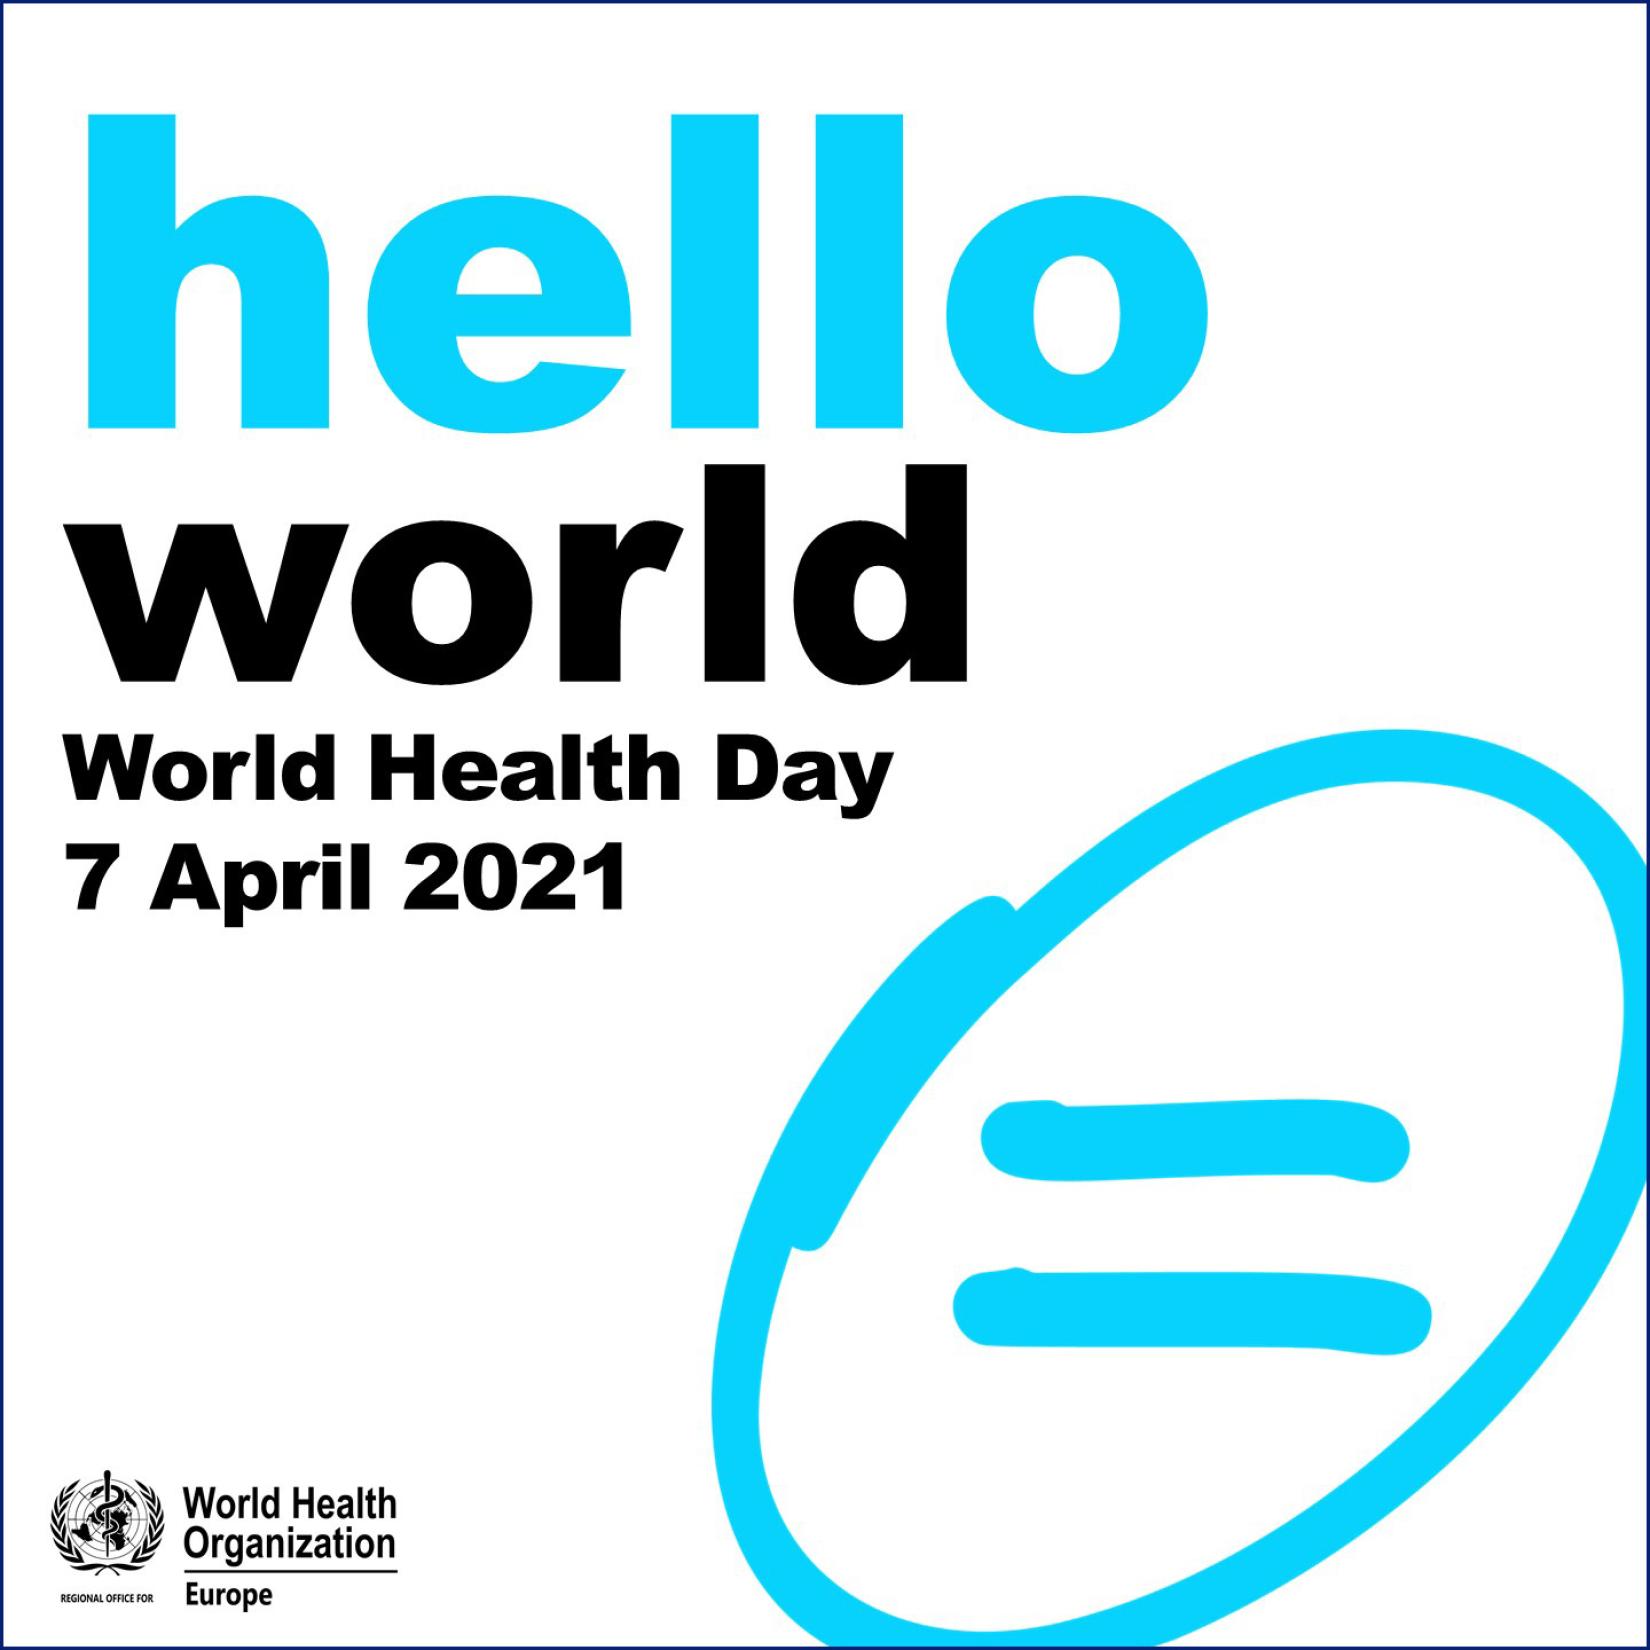 7 April is the World Health Day